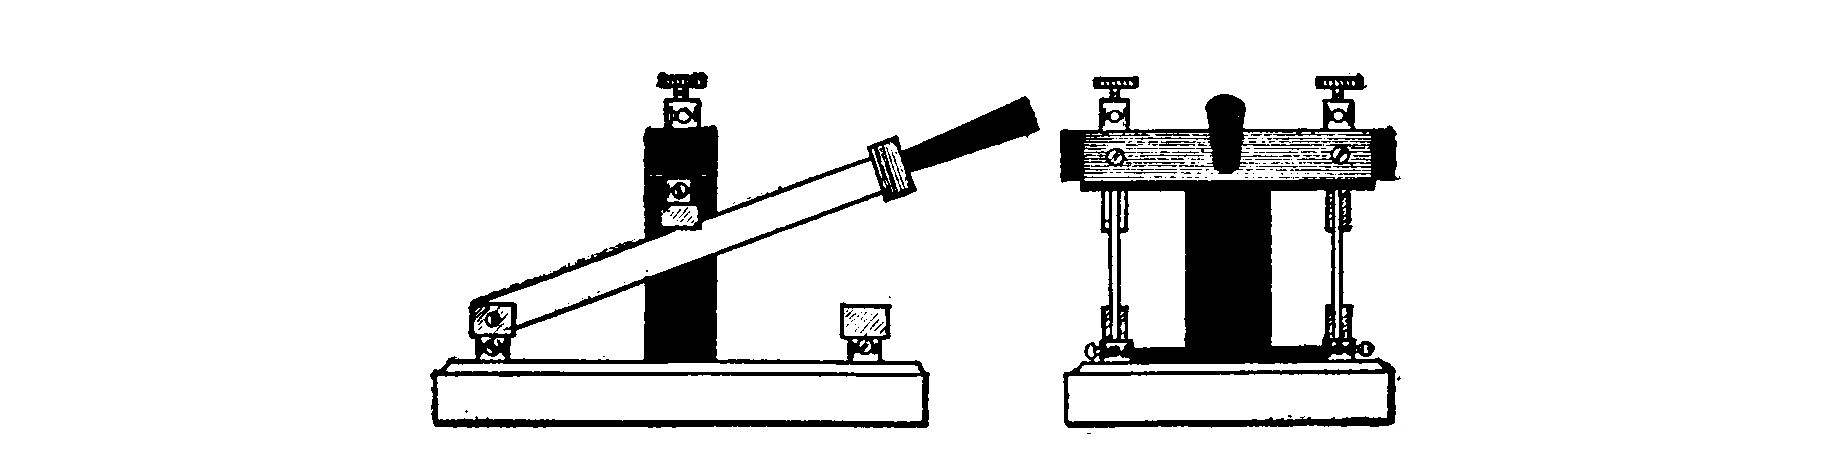 Fig. 75. "T" Aerial Switch.